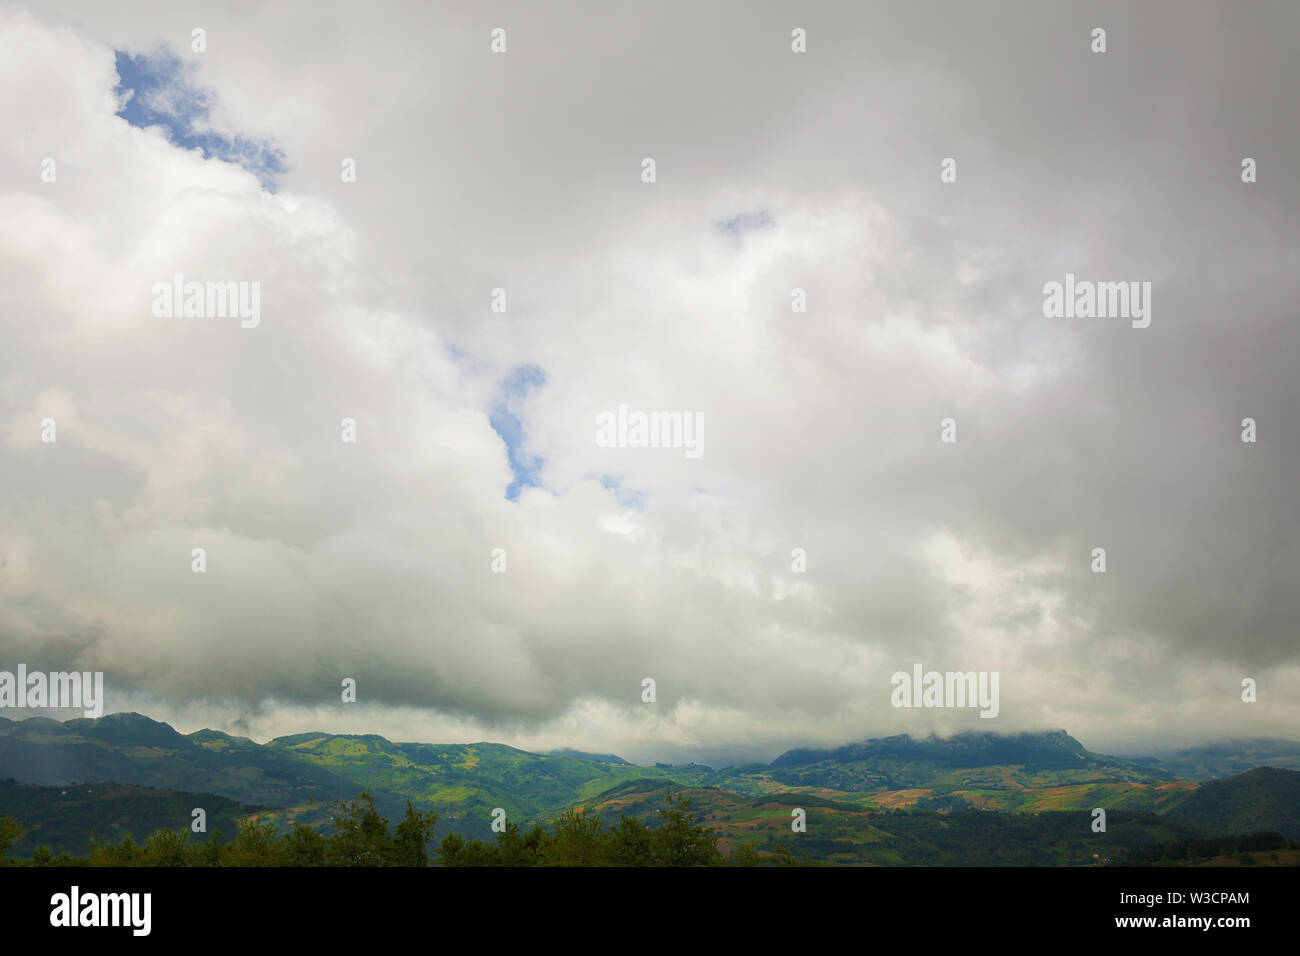 Bad weather during summer season in mountains region. Stock Photo